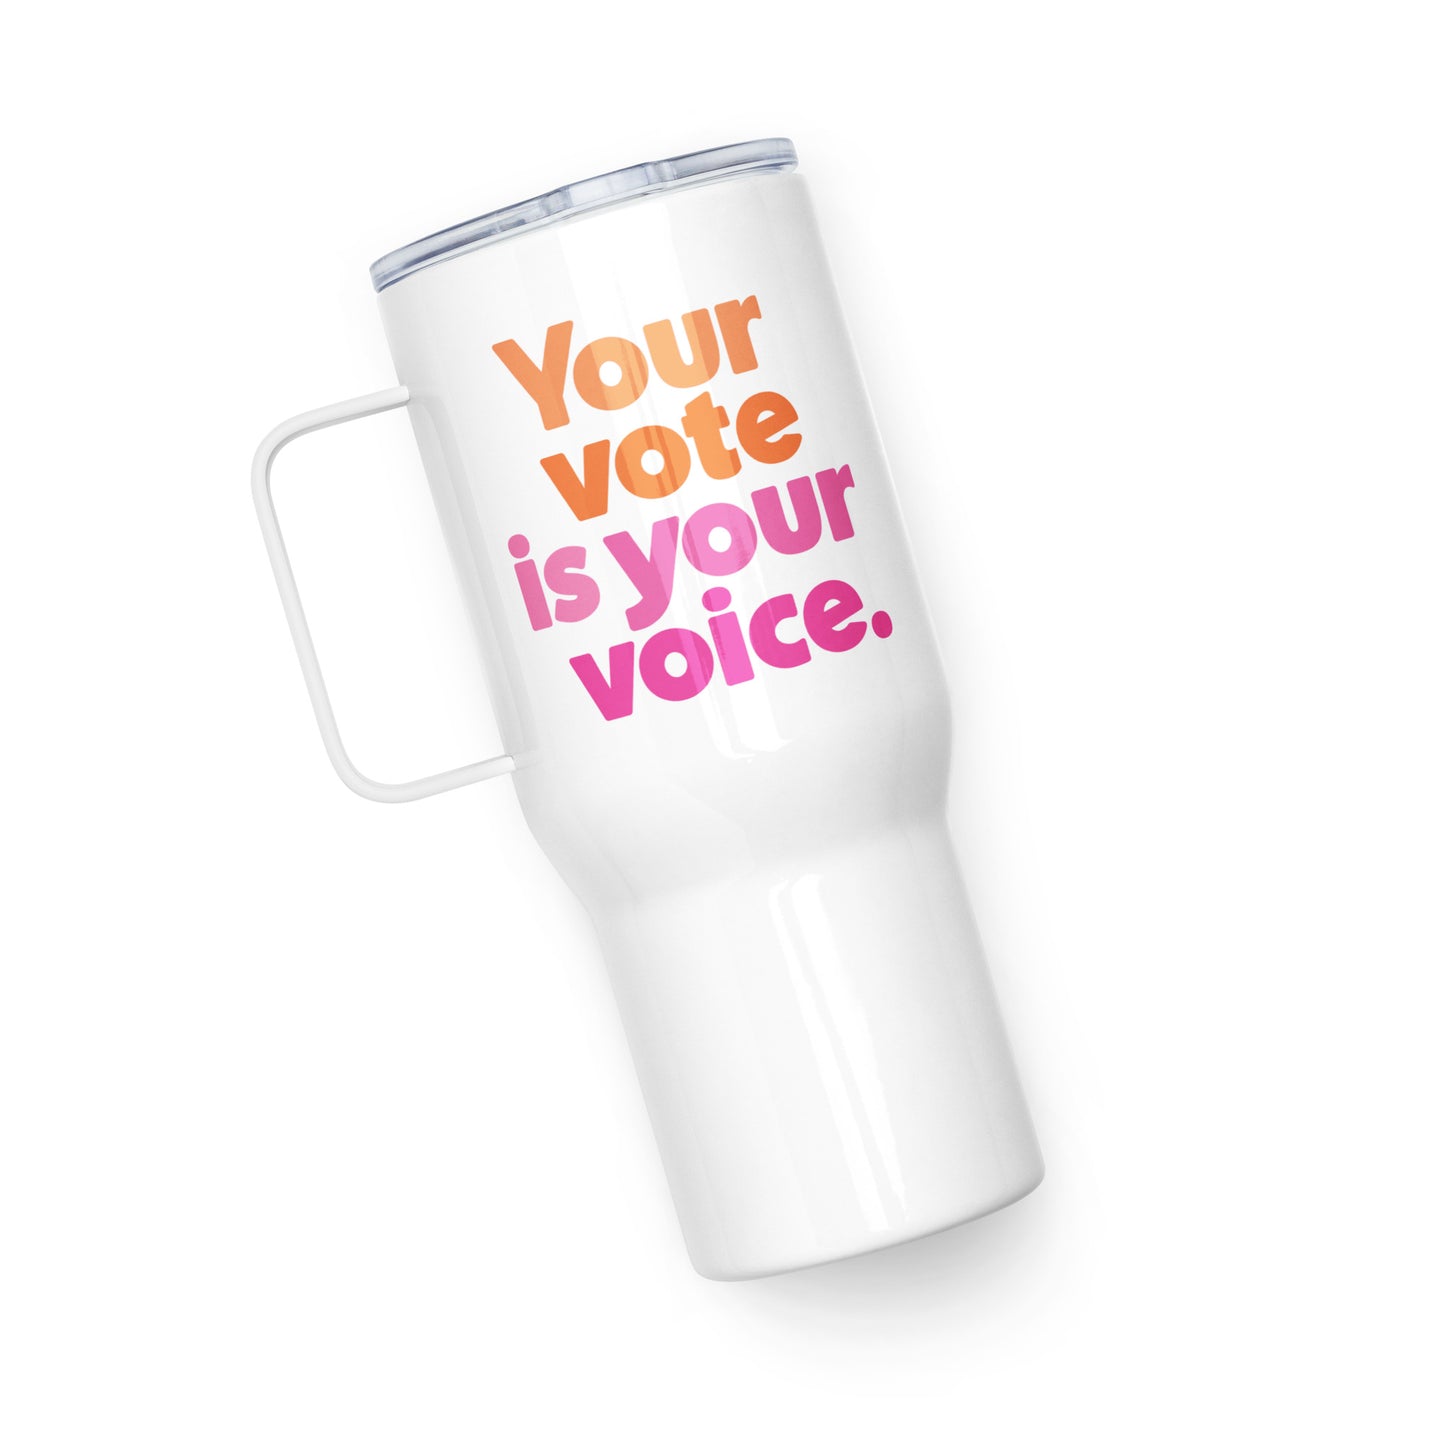 Your vote is your voice - Travel Mug